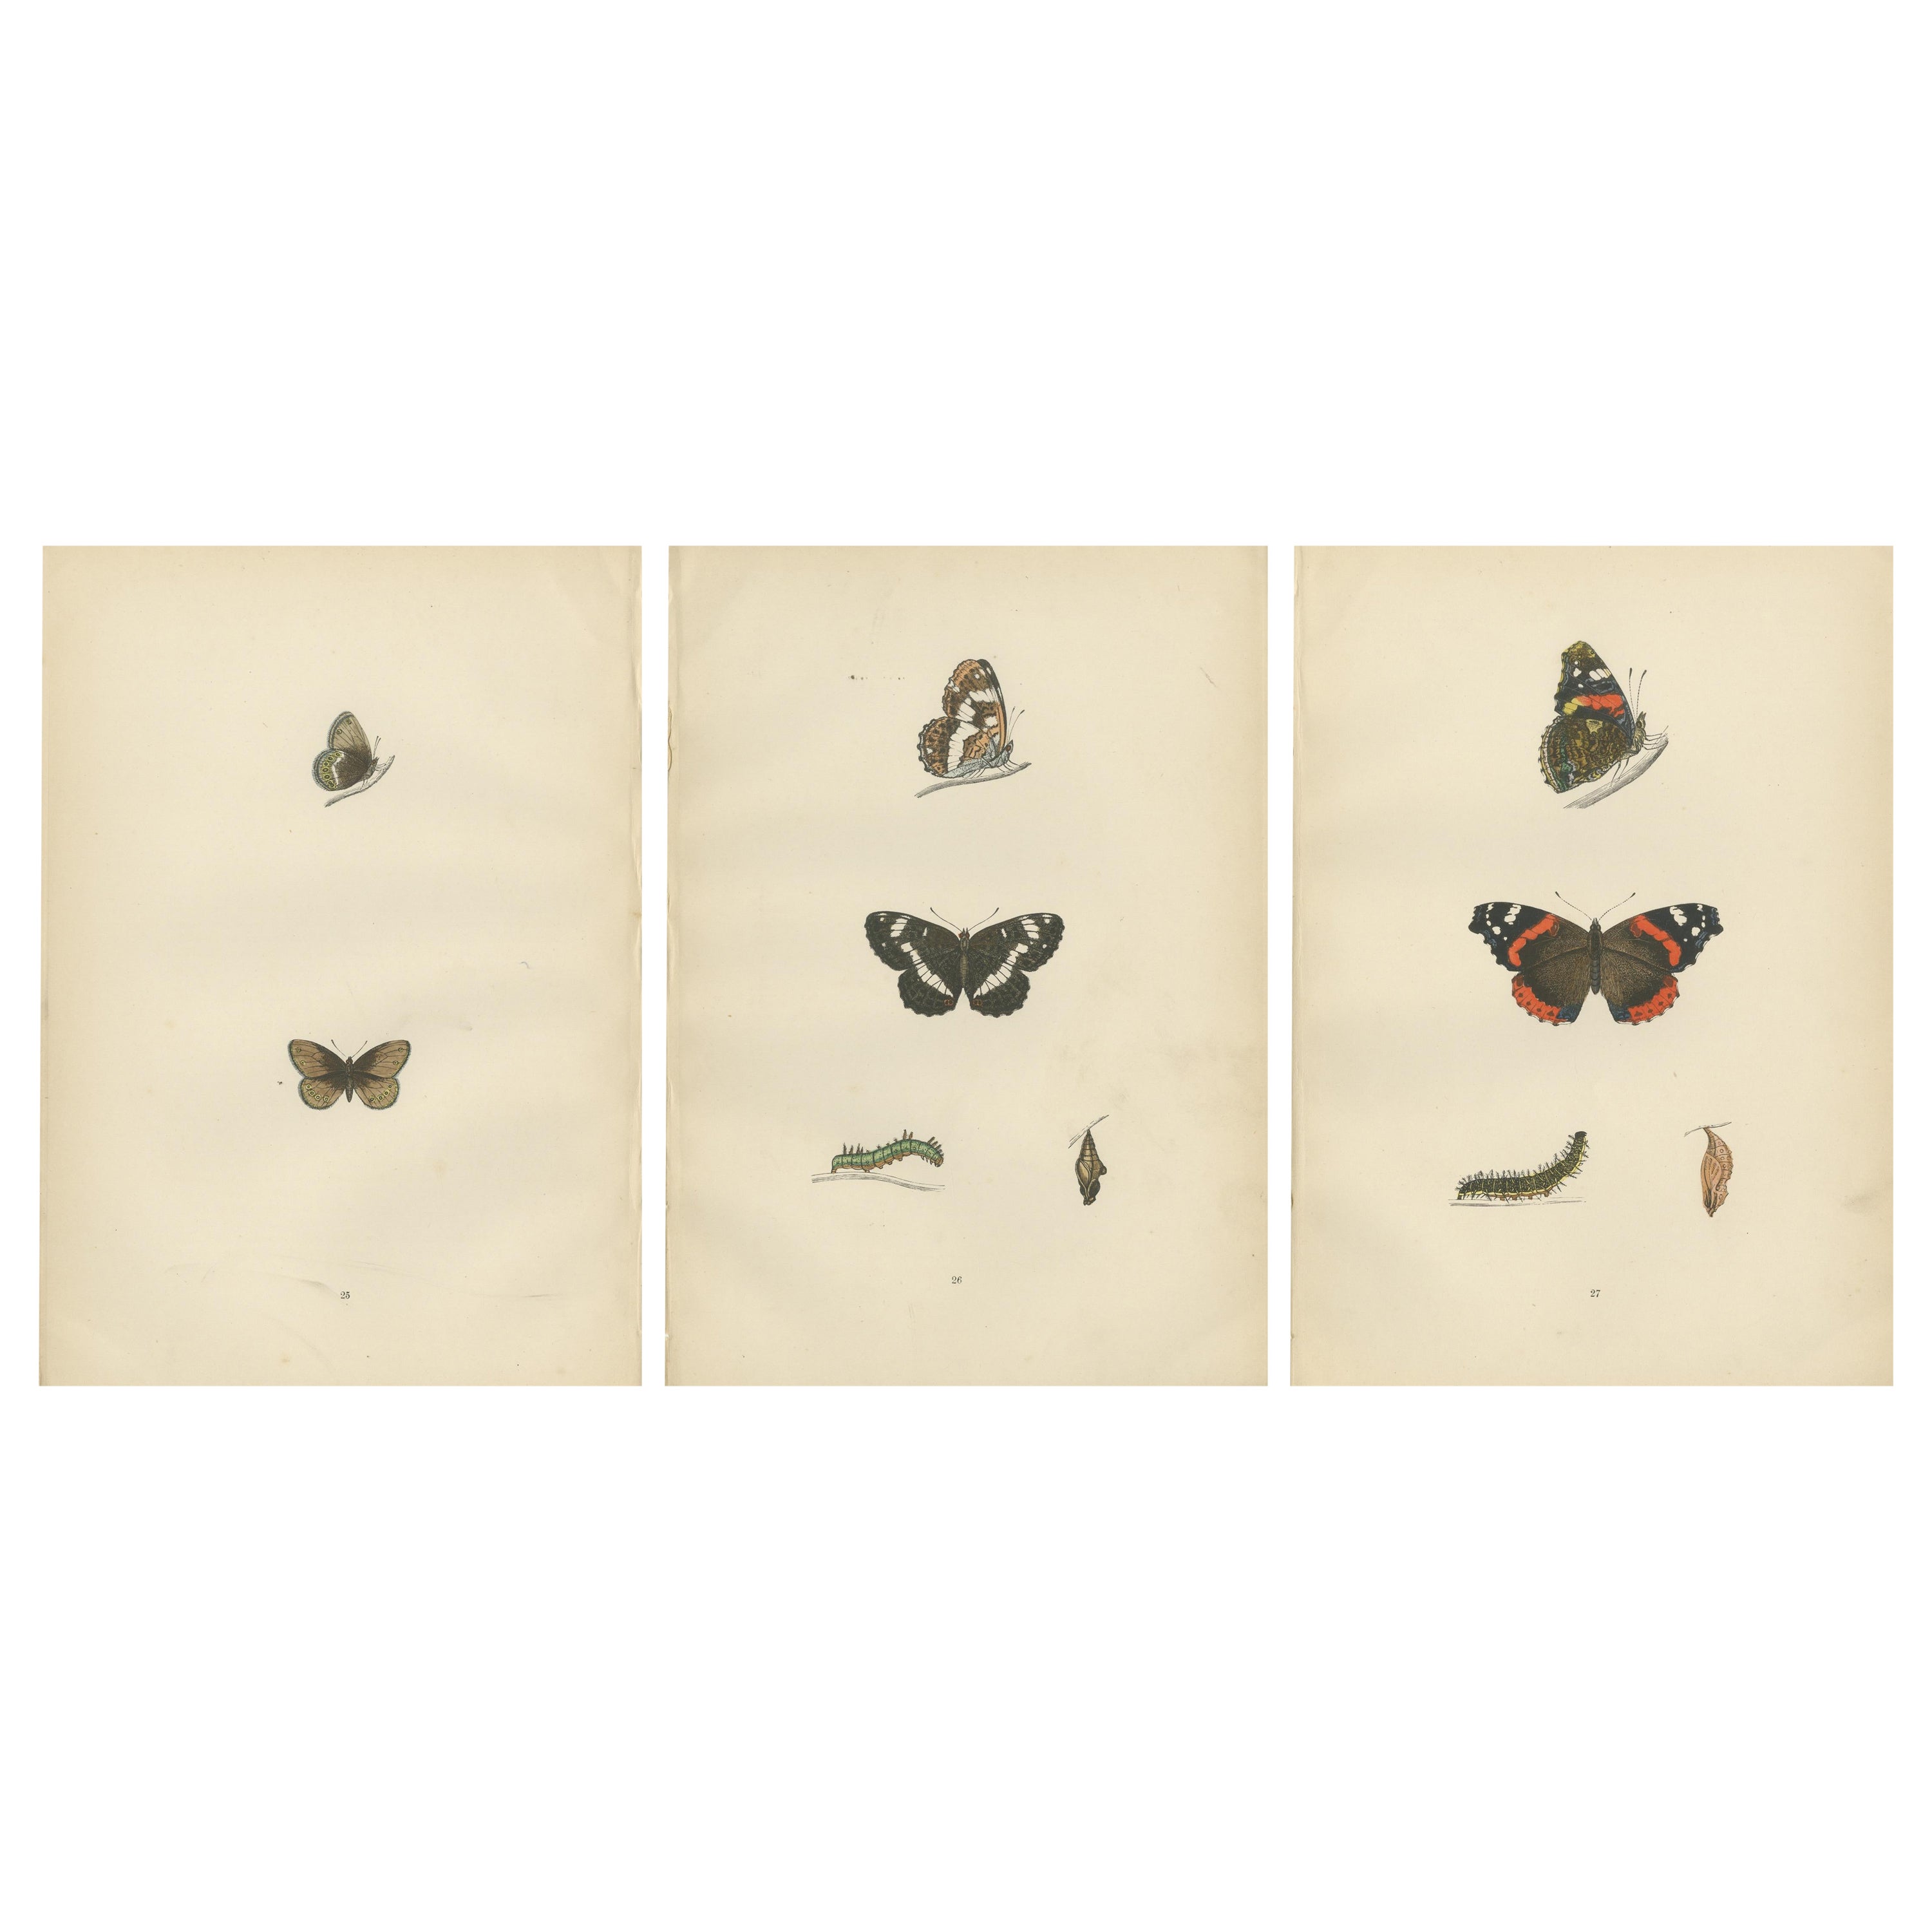 Metamorphosis in Motion: A Study of Butterfly Lifecycles, 1890